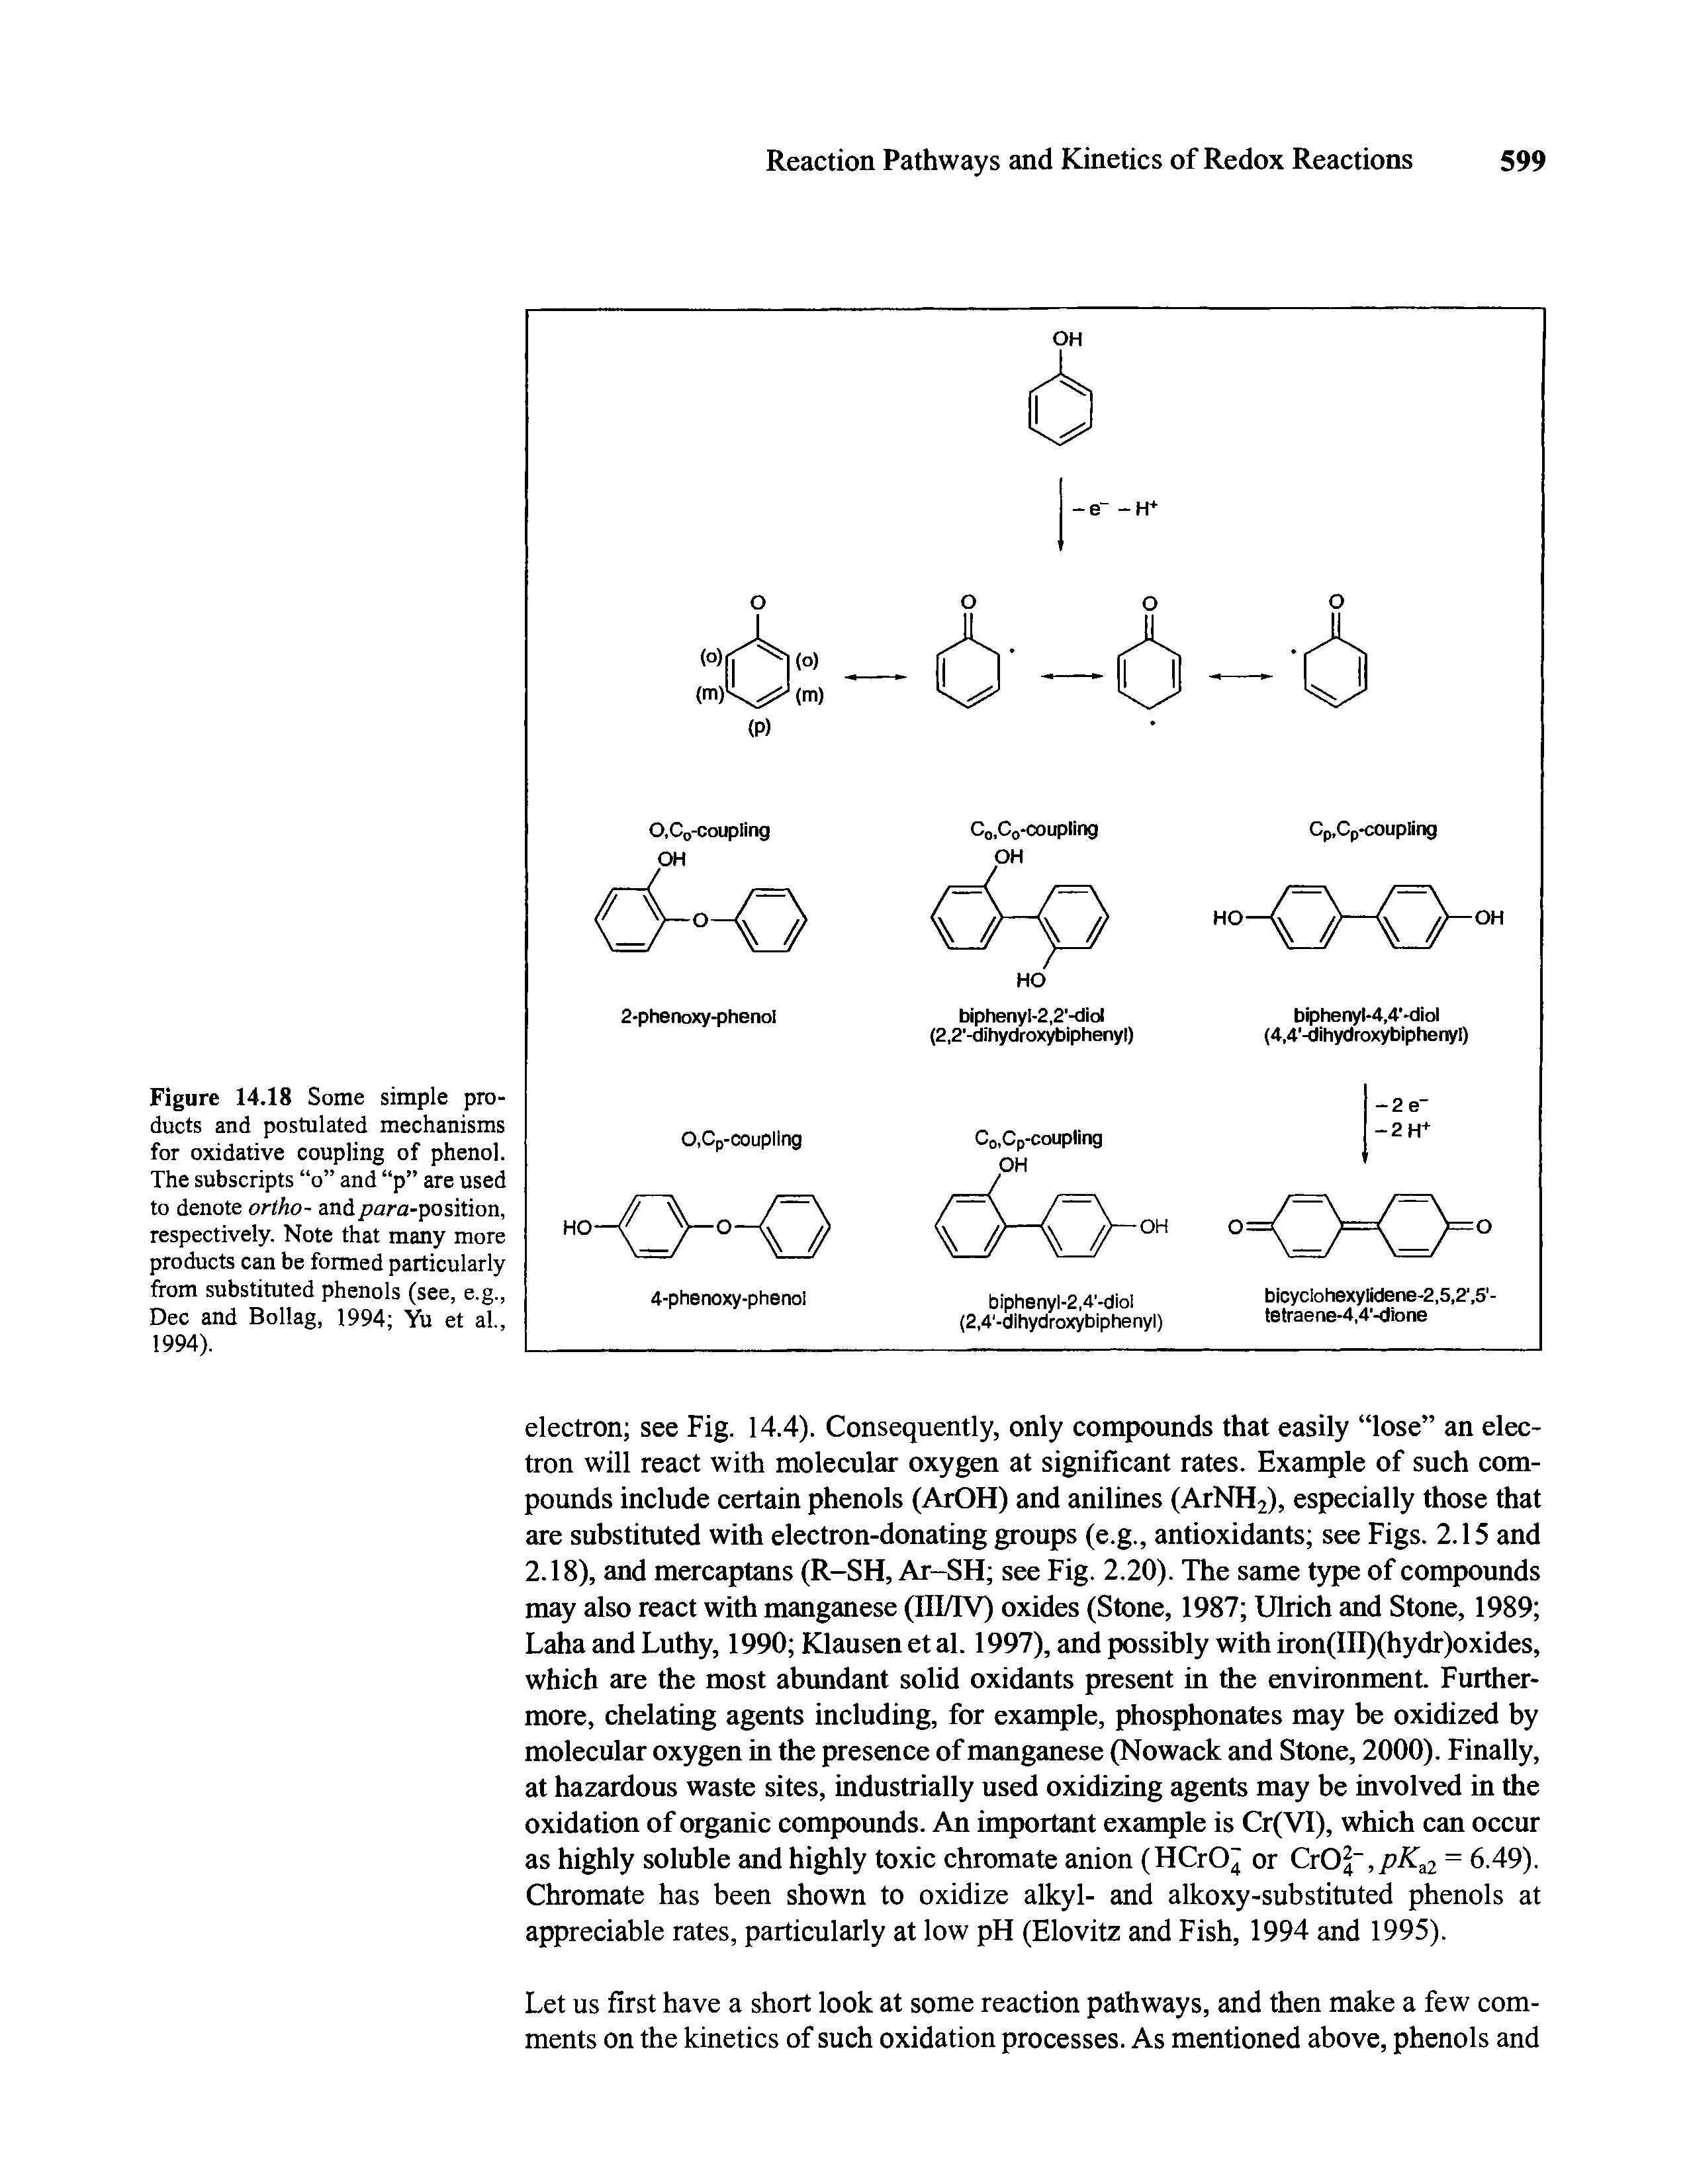 Figure 14.18 Some simple products and postulated mechanisms for oxidative coupling of phenol. The subscripts o and p are used to denote ortho- and para-position, respectively. Note that many more products can be formed particularly from substituted phenols (see, e.g., Dec and Bollag, 1994 Yu et al., 1994).